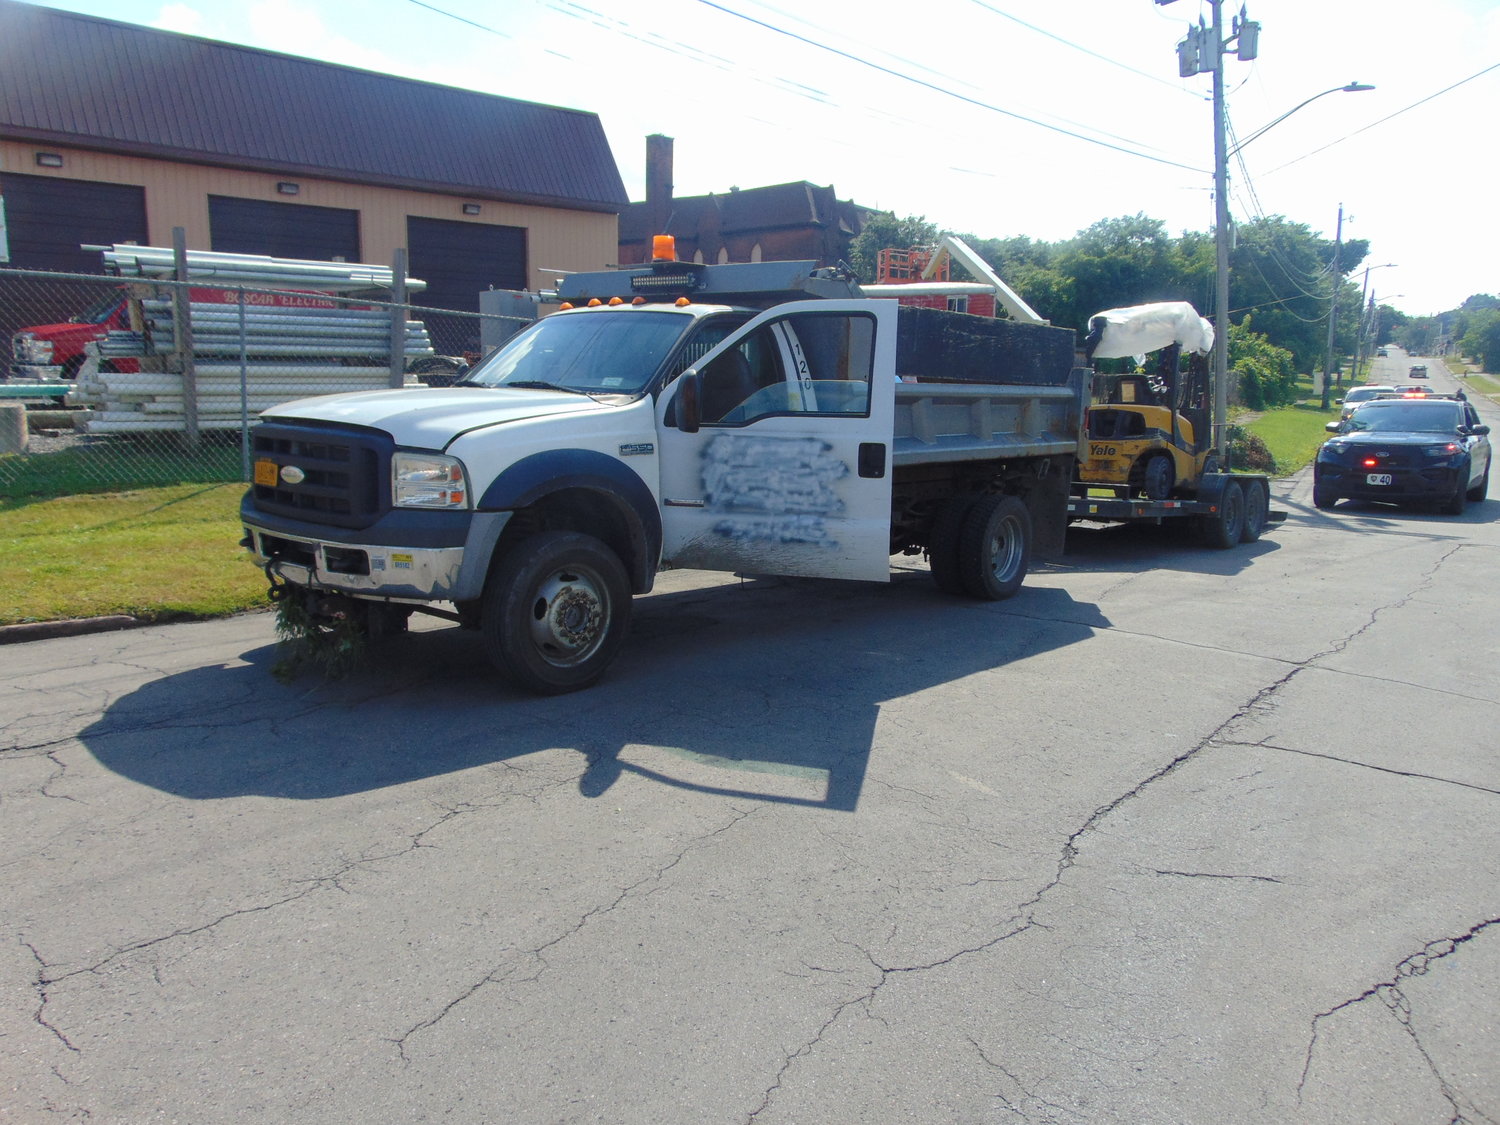 This dump-style truck and the forklift it’s hauling were stolen from a business on North Genesee Street in Utica over the weekend. Utica Police said they found the truck Tuesday afternoon, and someone had tried to spray paint over the business name on the door. The driver has been charged.